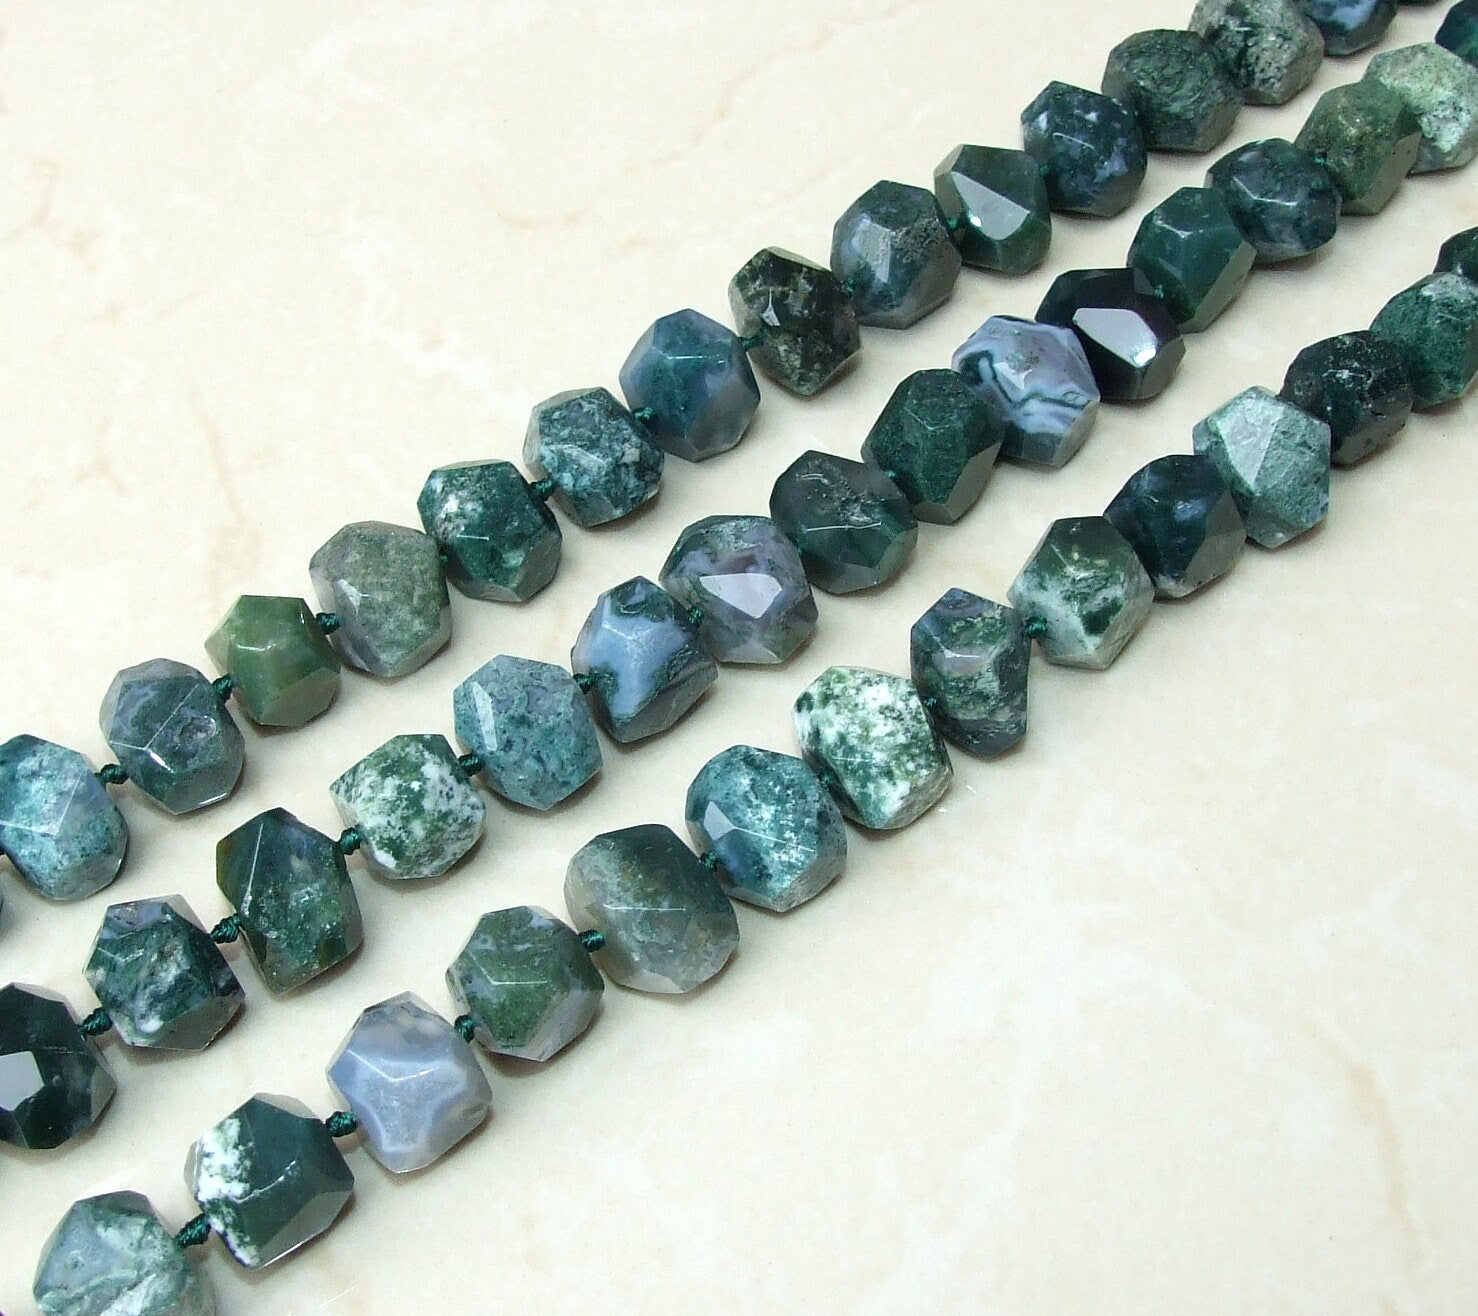 Moss Agate Faceted Nugget - Gemstone Beads - Polished Moss Agate Pendant - Moss Agate Bead - Half Strand, Cross Drilled - 15mm x 15mm x 20mm